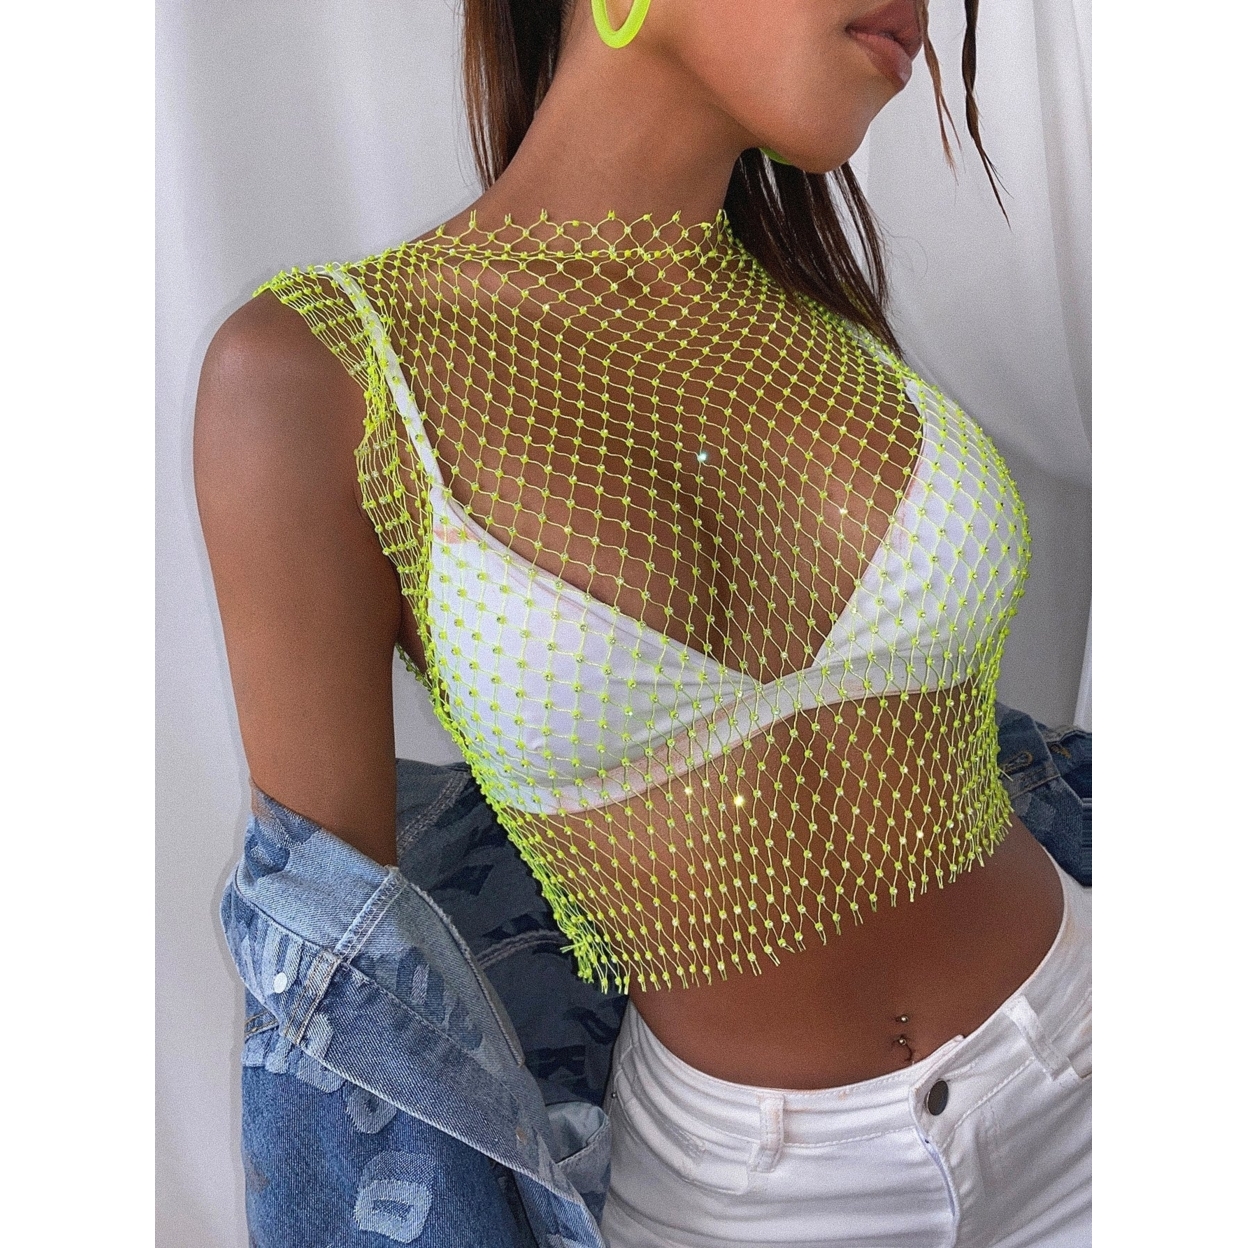 Rhinestone Detail Fishnet Top Without Bra - Lime Green, M